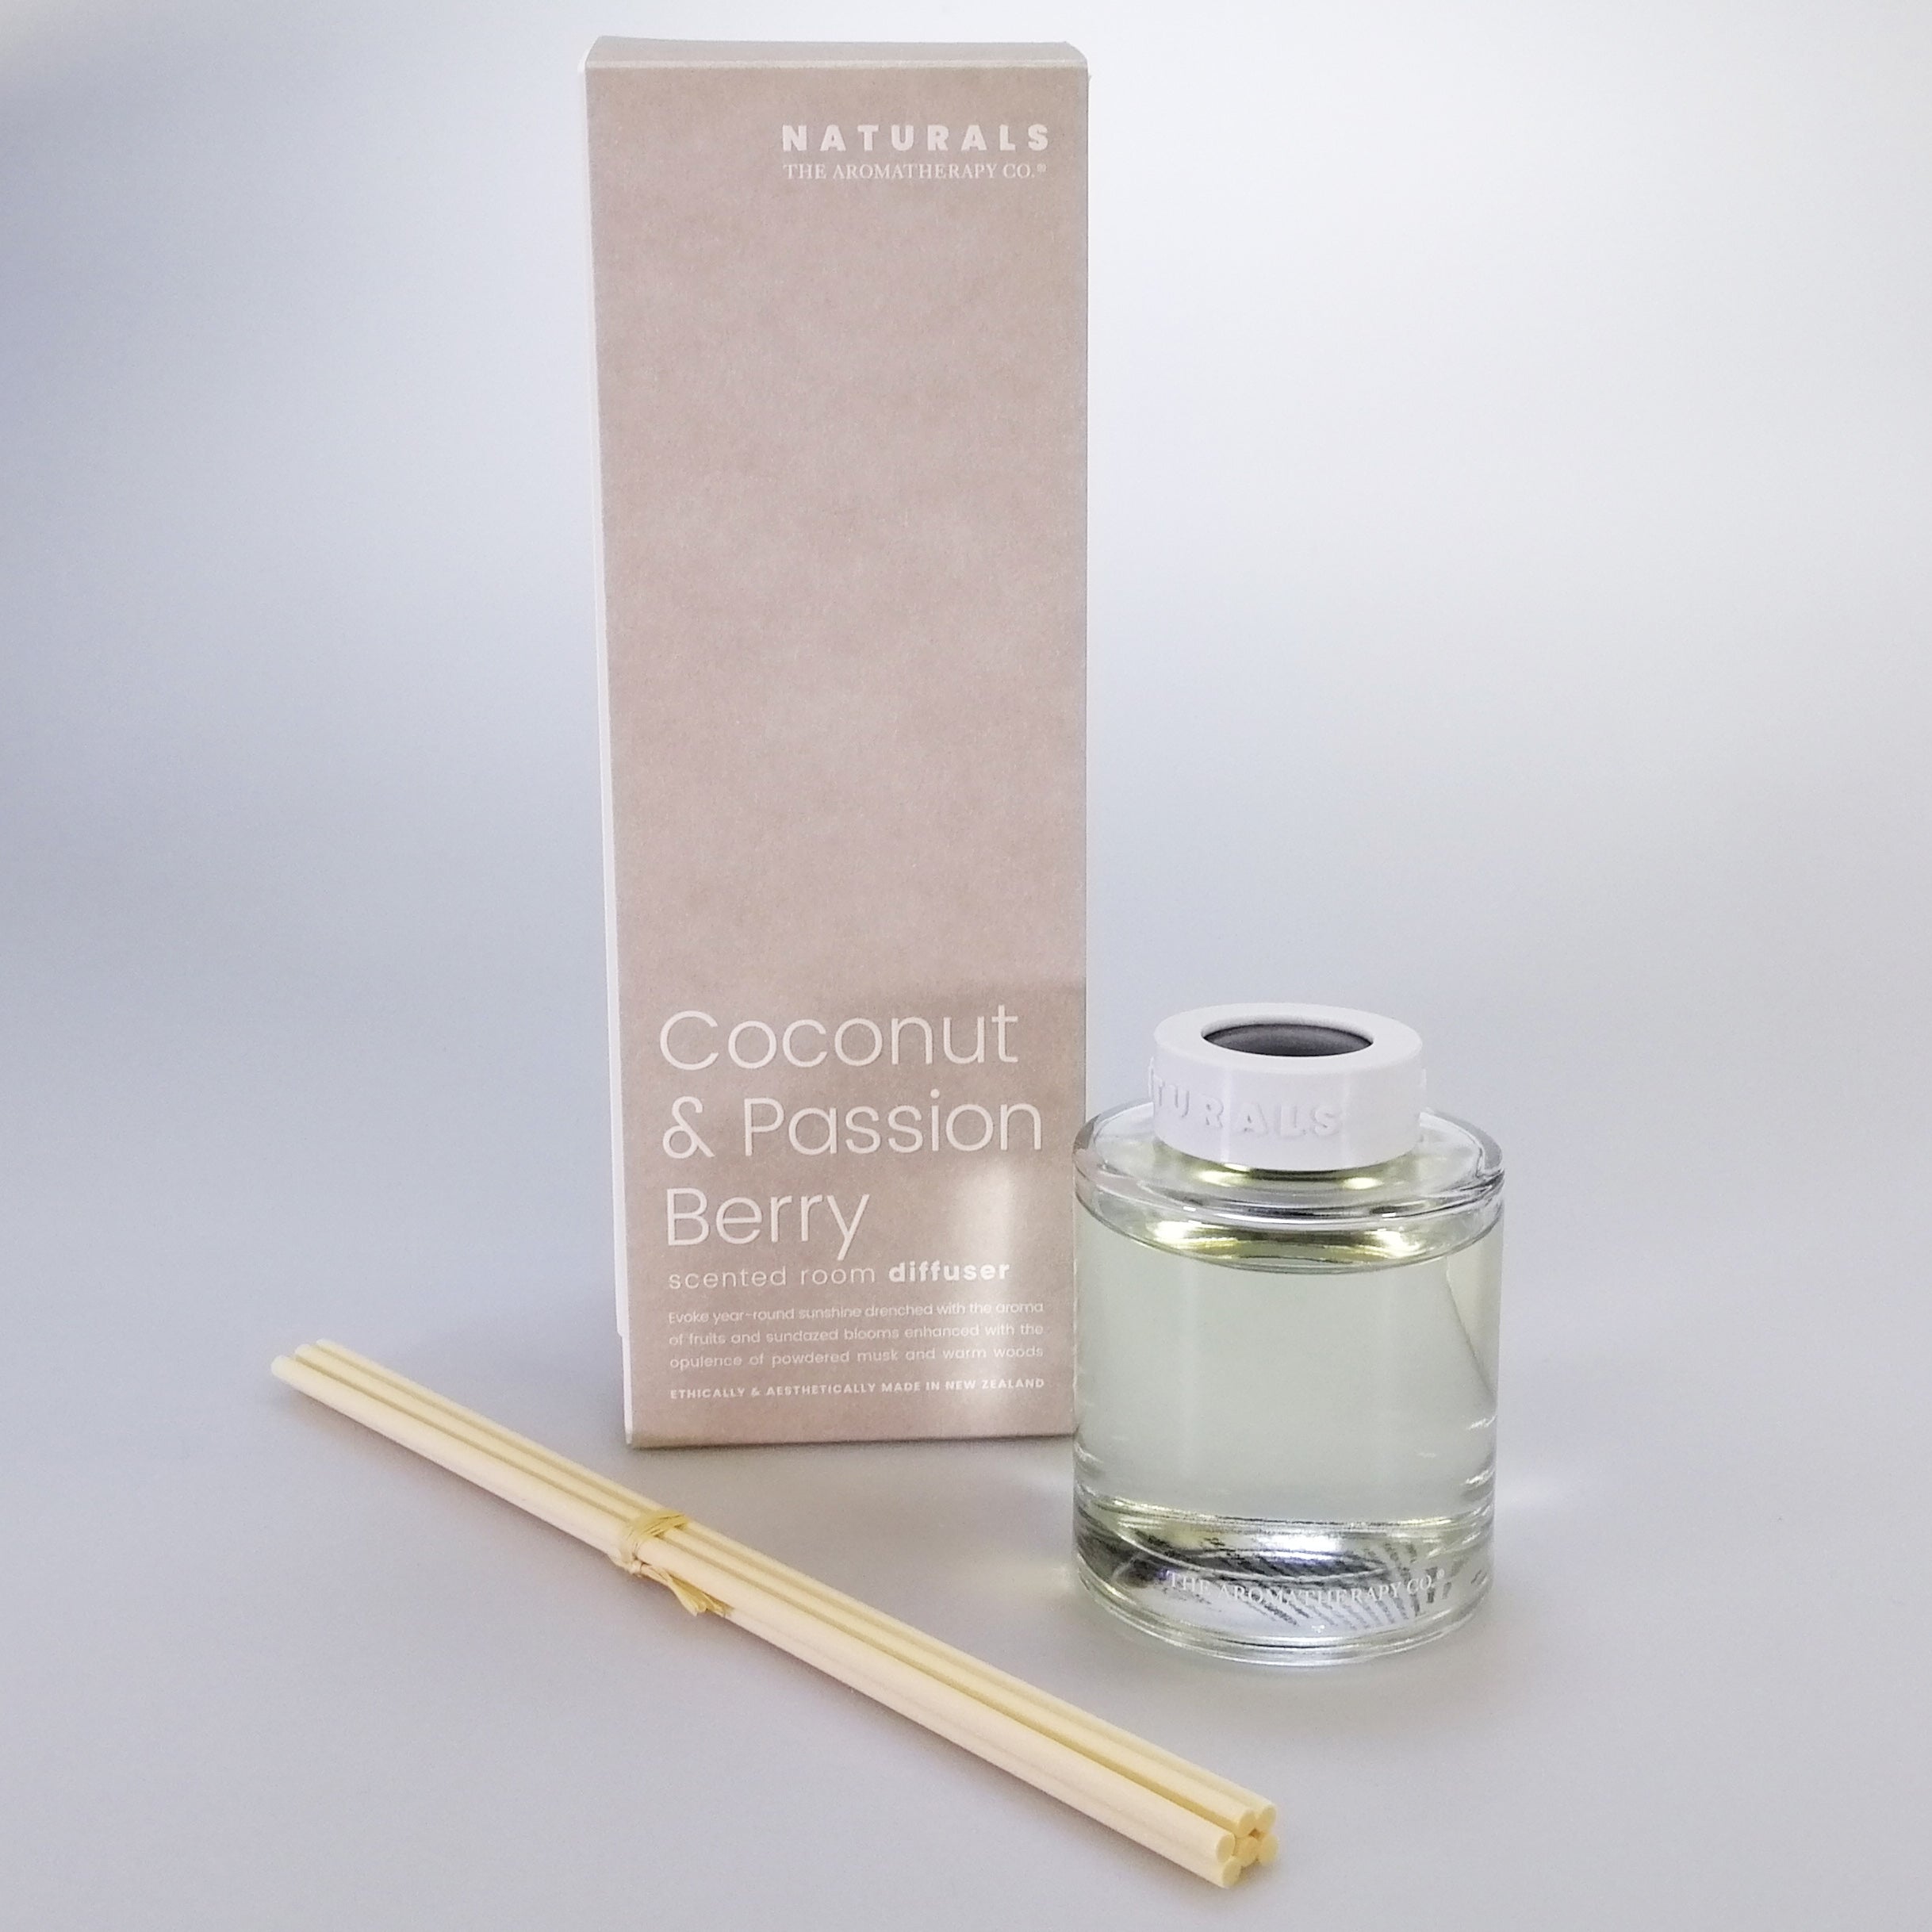 The Aromatherapy Co. Naturals - Coconut & Passion Berry Diffuser